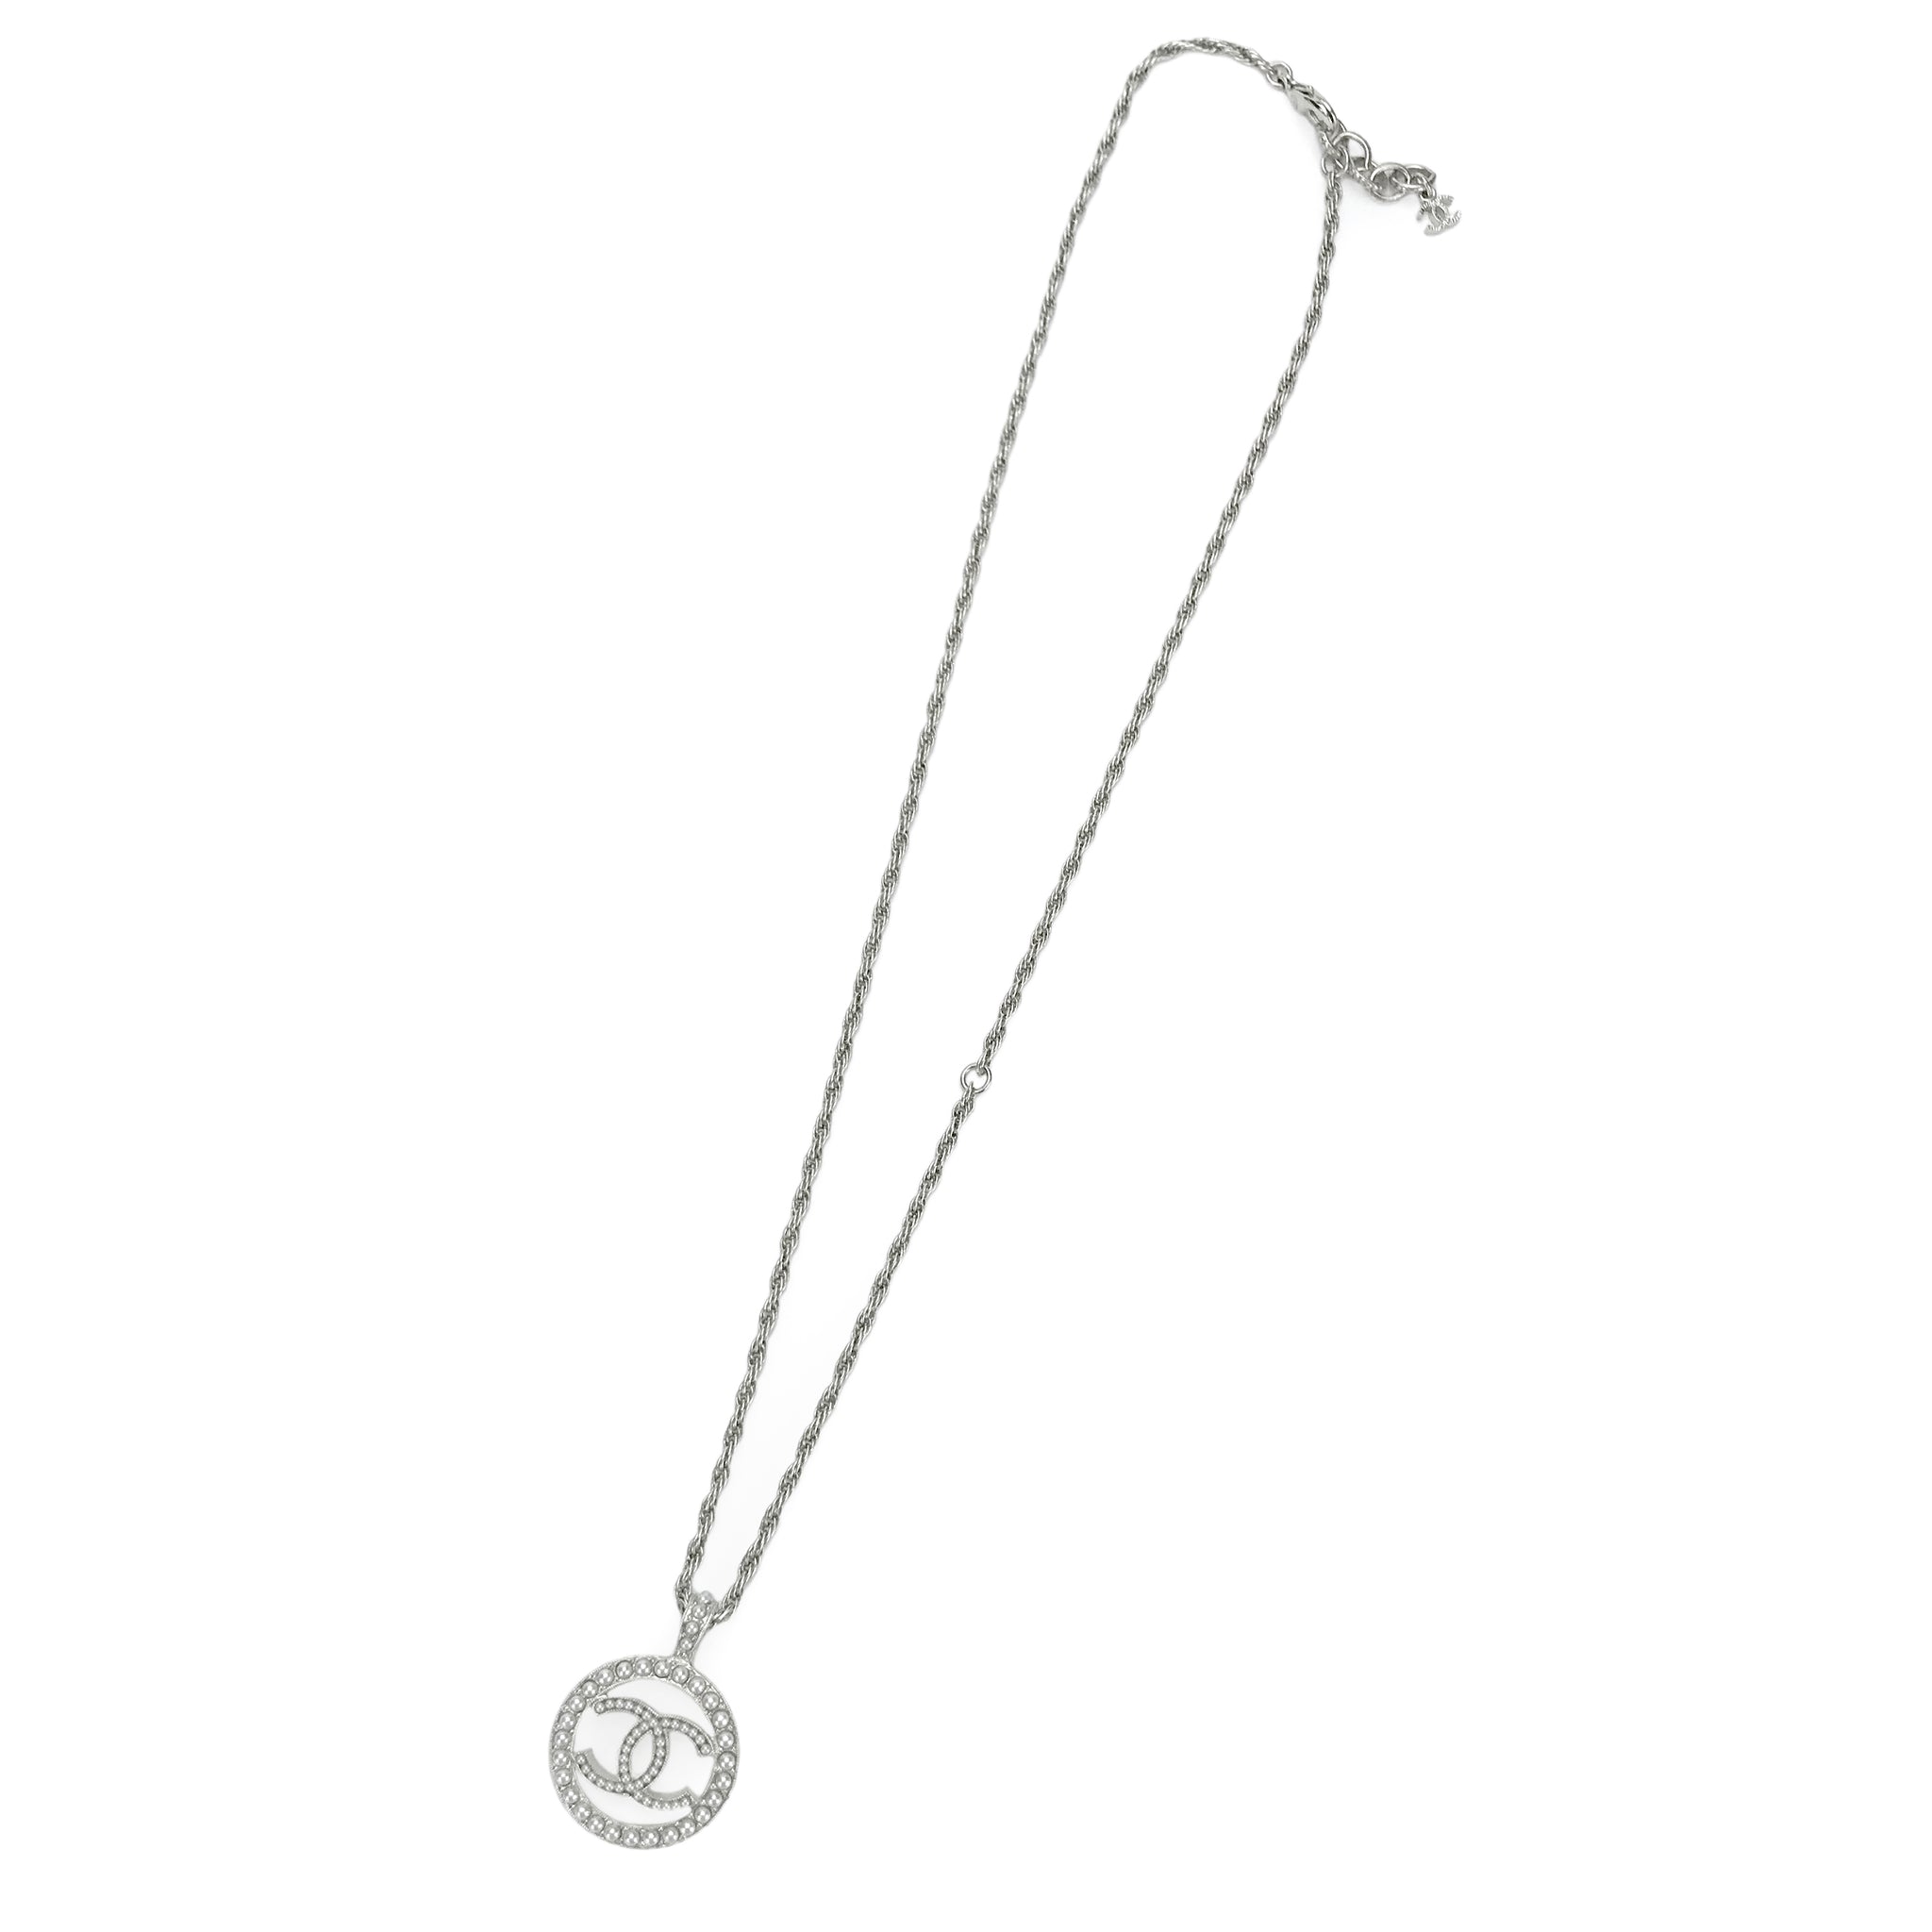 Cc necklace Chanel Black in Metal  29845169